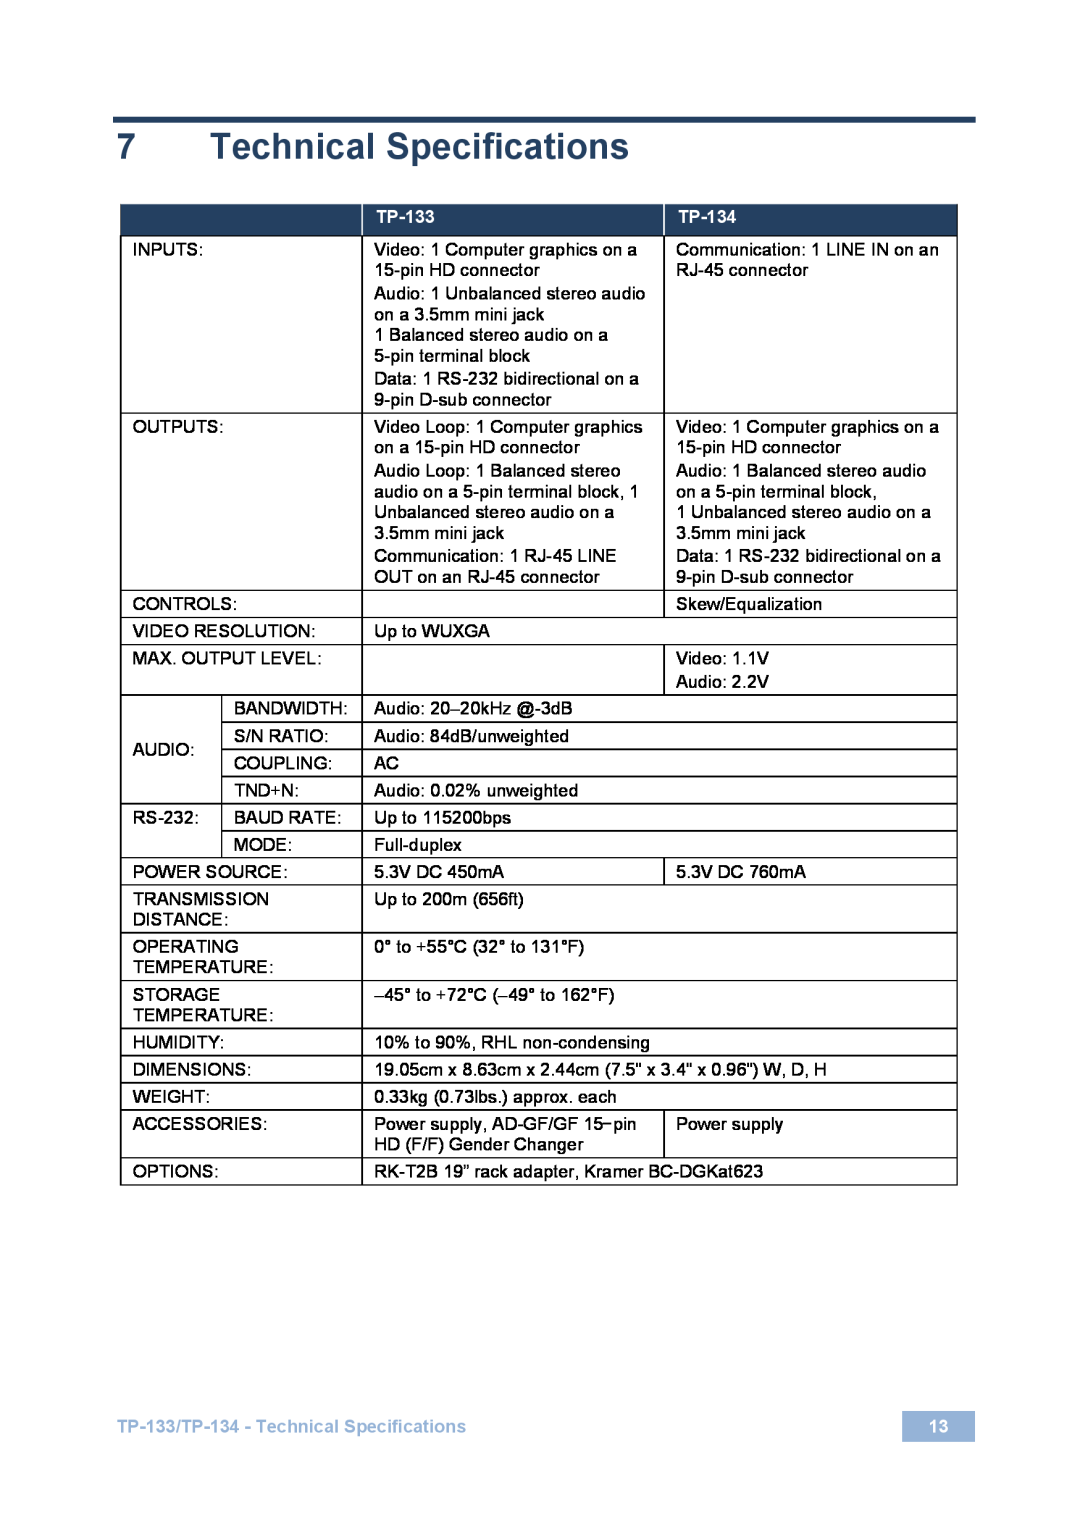 Kramer Electronics user manual TP-133/TP-134- Technical Specifications 